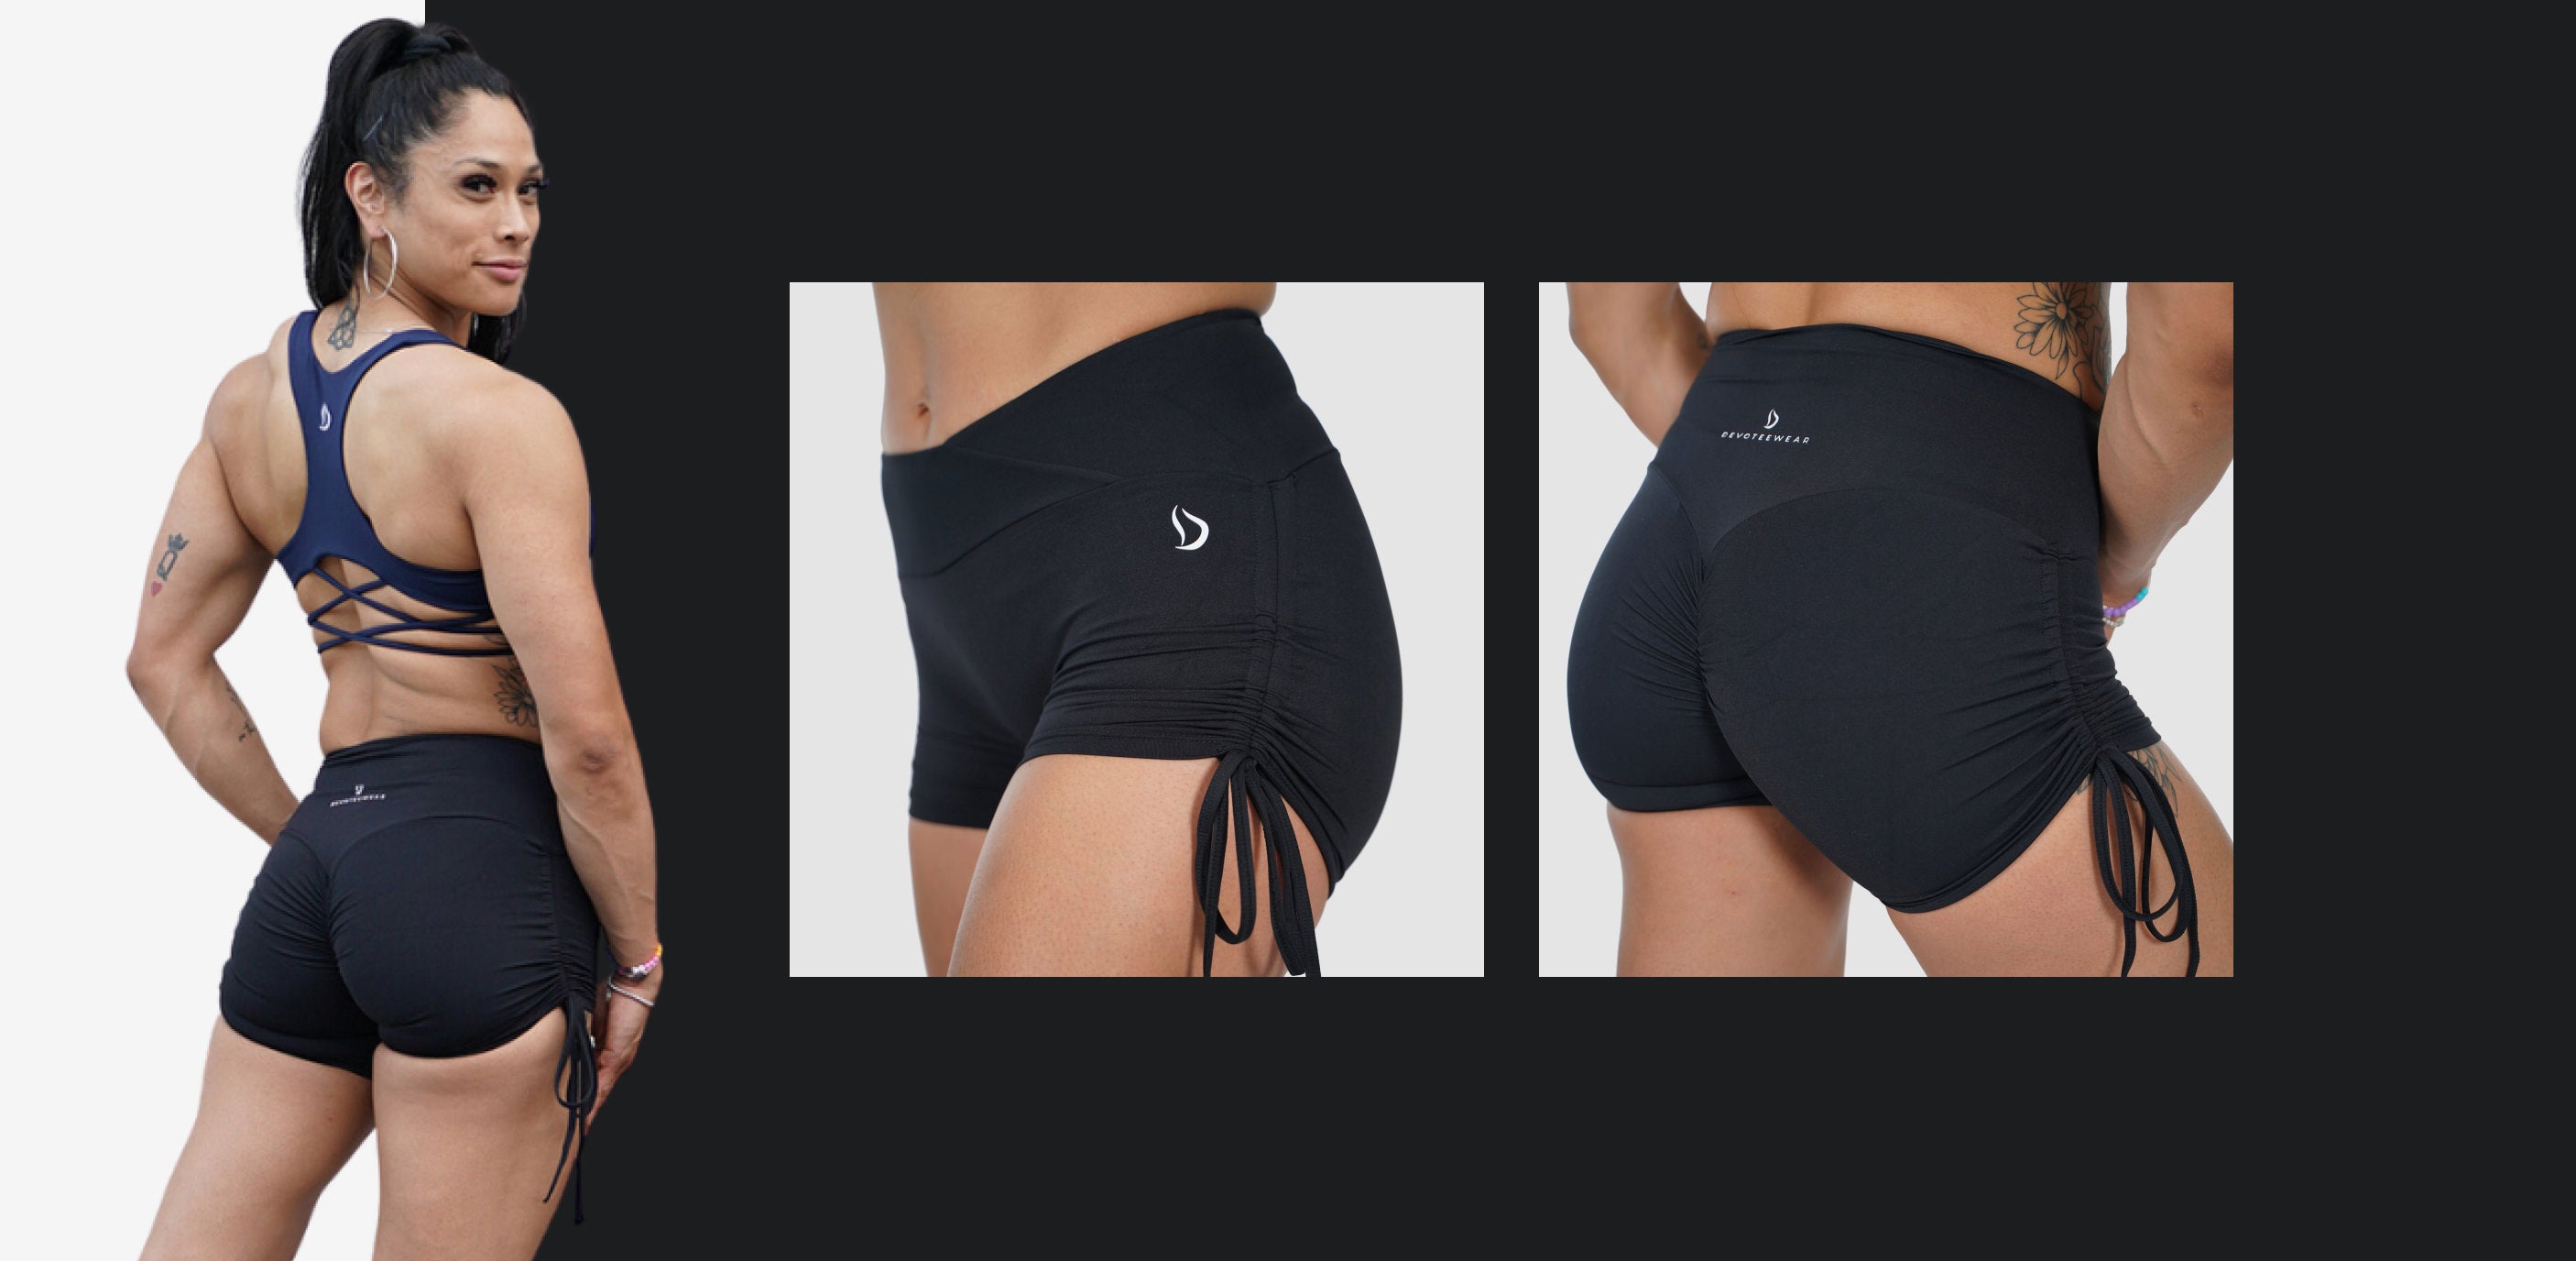 pair of sleek tie-up scrunch bum shorts, featuring adjustable side ties and a ruched back seam. The design offers both style and functionality, perfect for enhancing curves while providing comfort and flexibility during intense gym workouts.  Feel free to use or modify this description as you see fit!